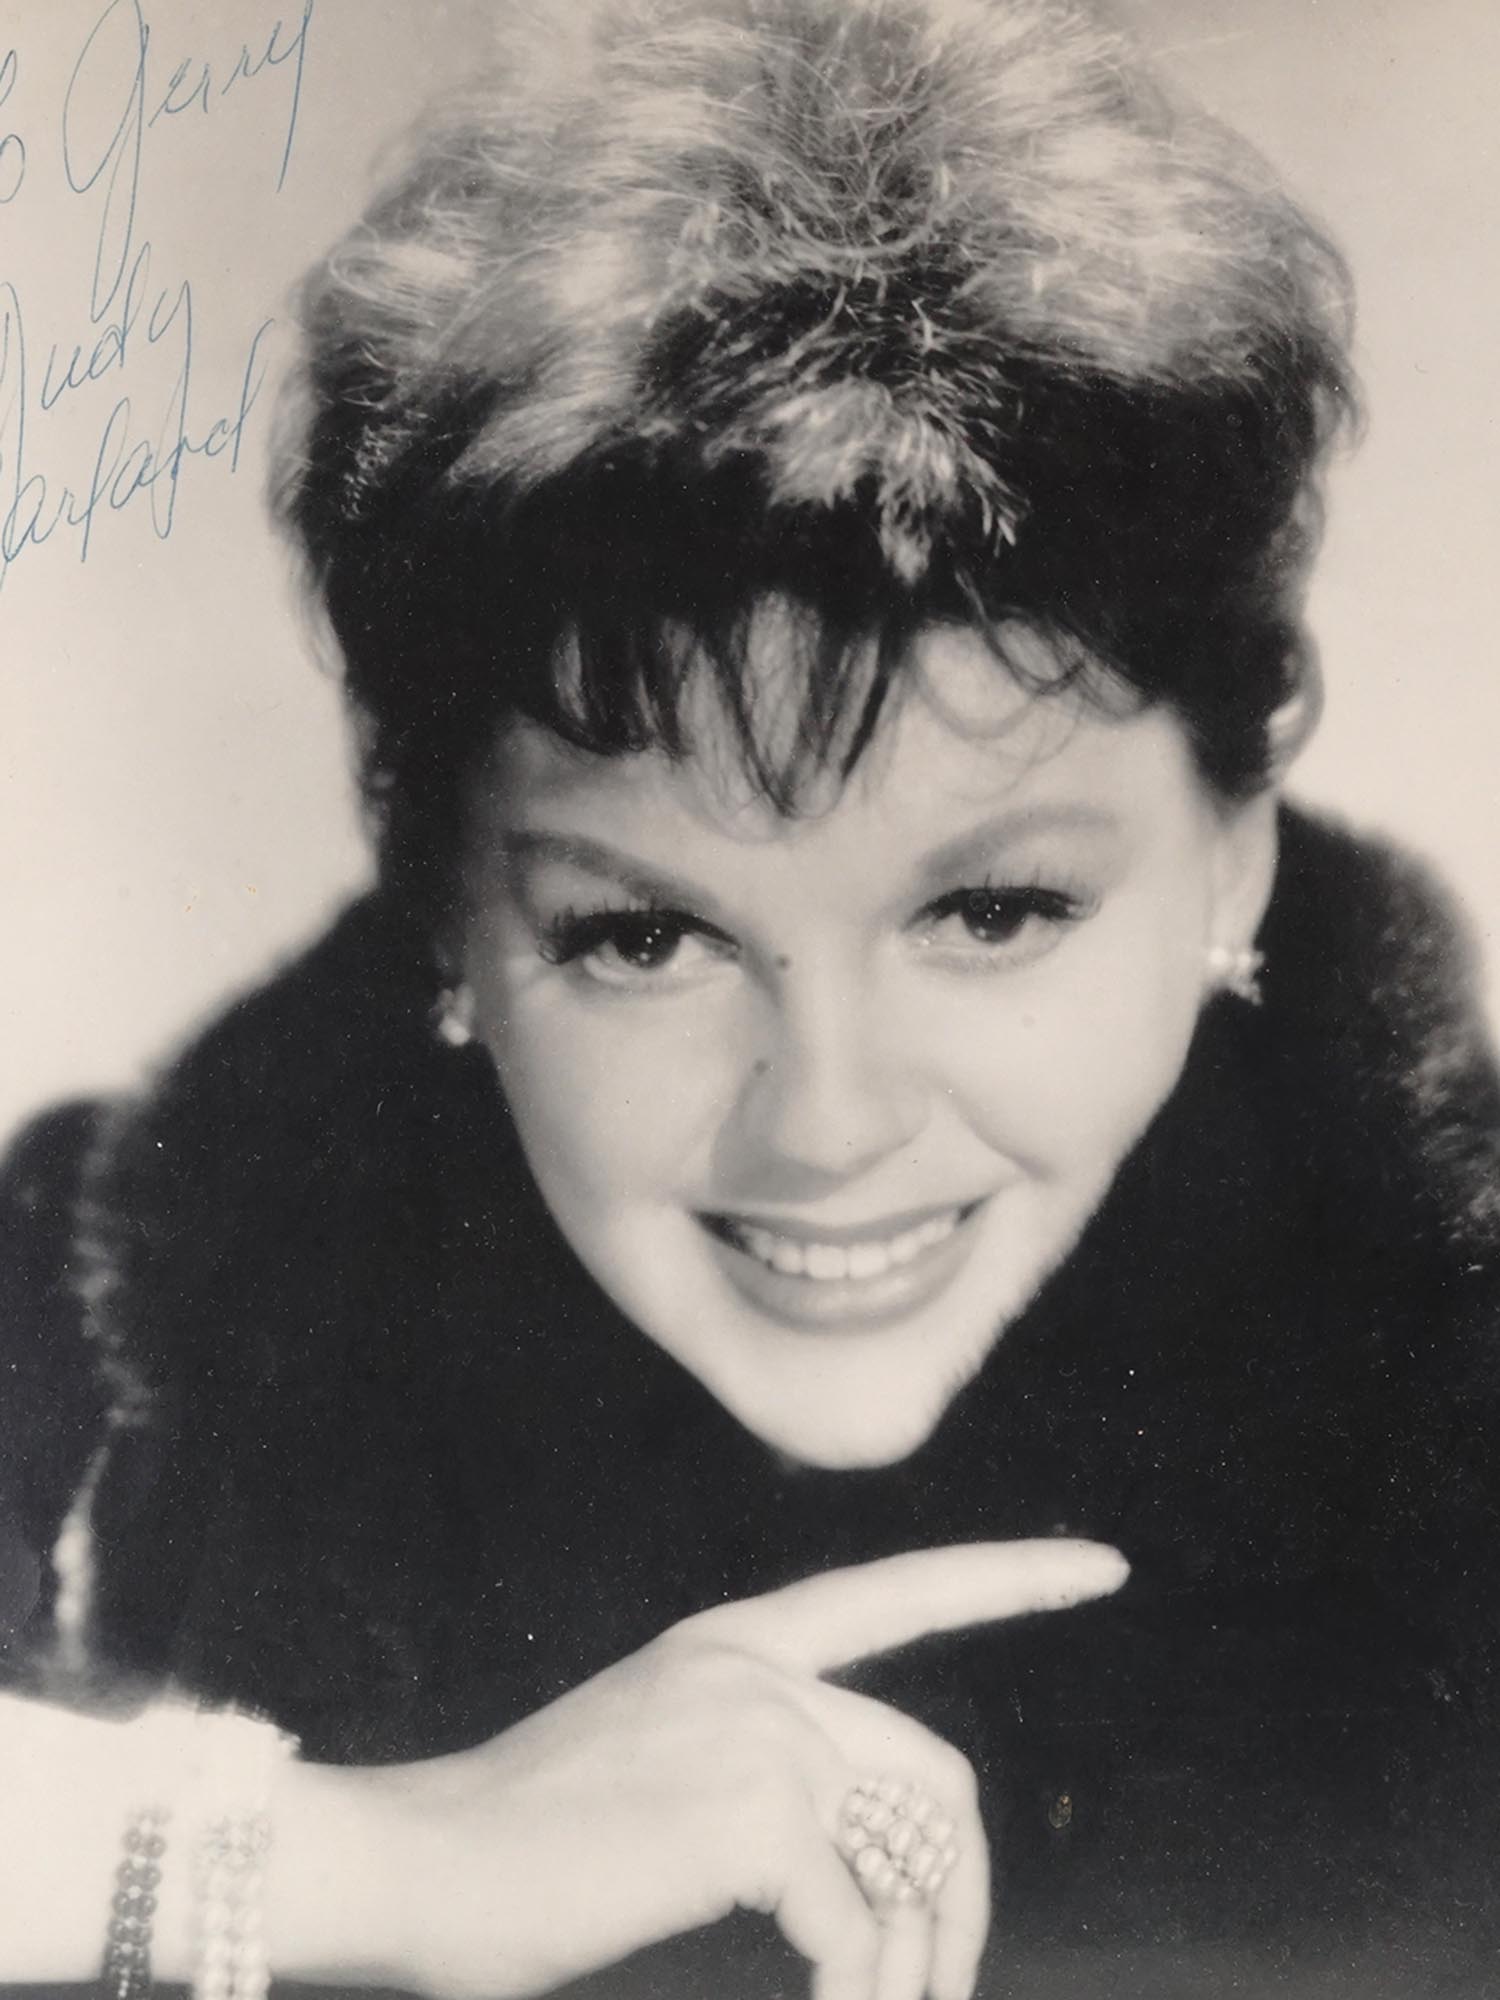 FRAMED PHOTOGRAPH OF JUDY GARLAND WITH AUTOGRAPH PIC-1